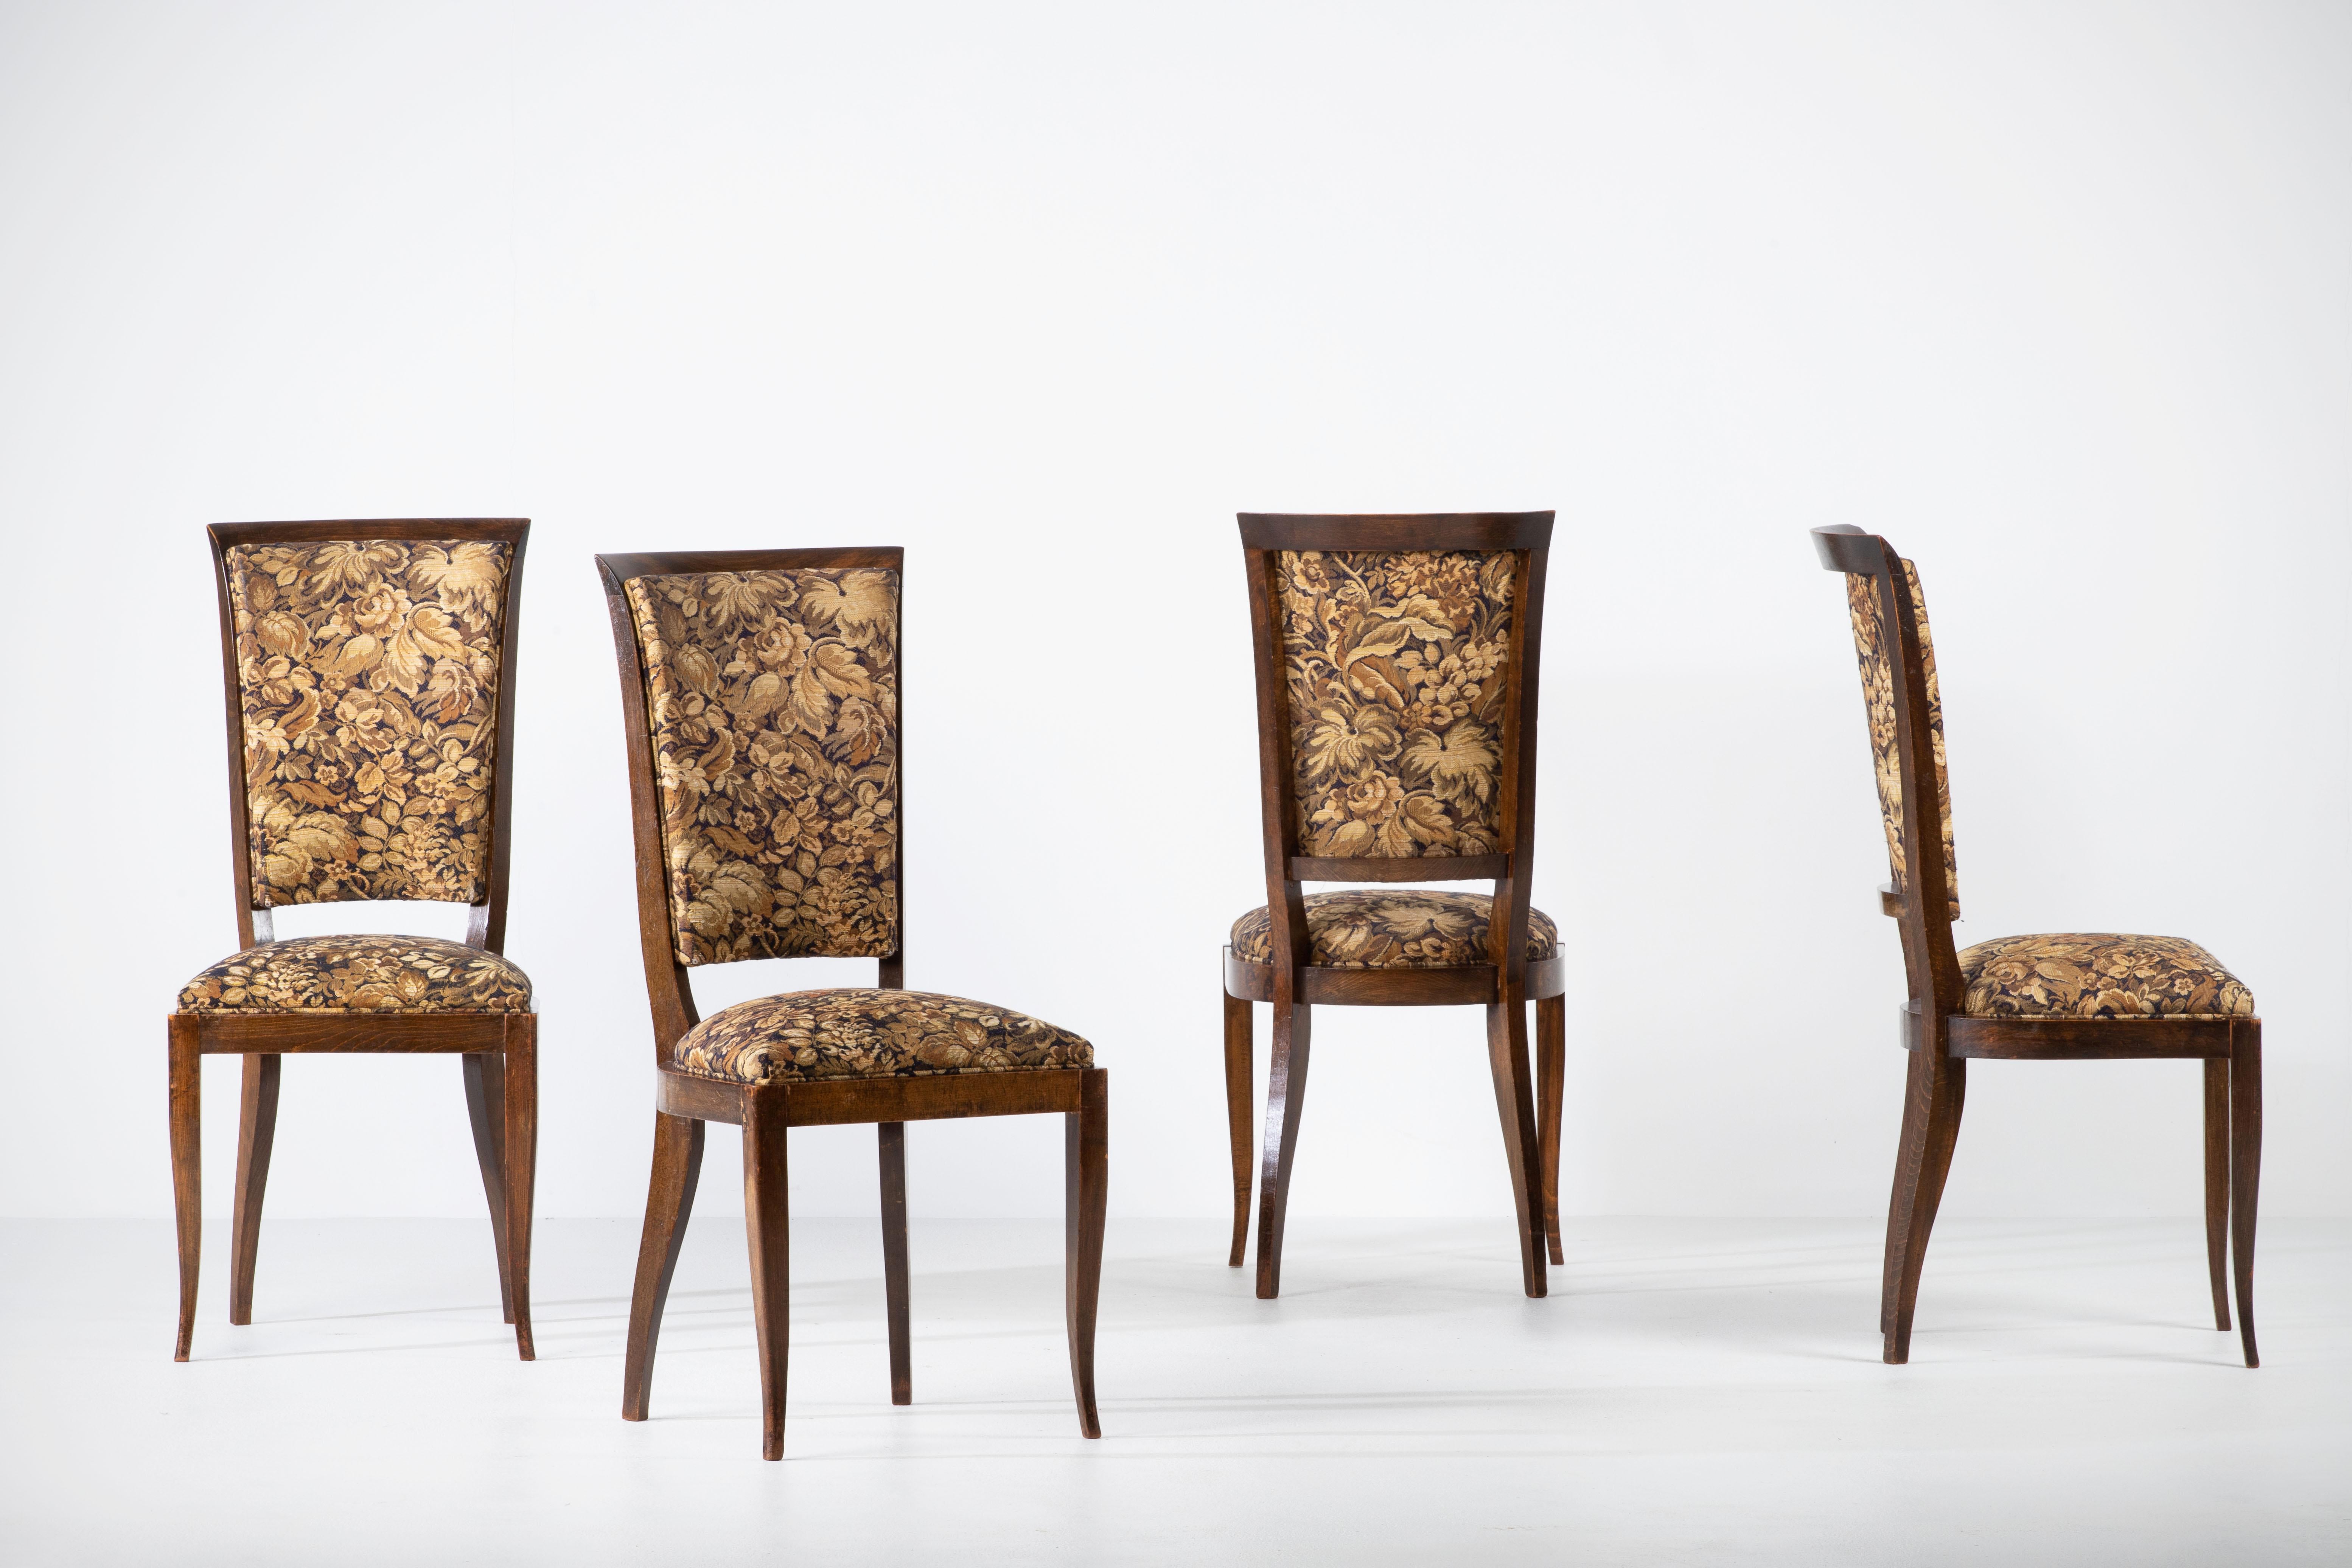 Set of four French Art Deco dining chairs, Charles Dudouyt, 1940s, France.

We can clearly see the work of the French school of the 1940s. The detailed designed backrest panels will meet the standards of the most demanding interiors with elegance